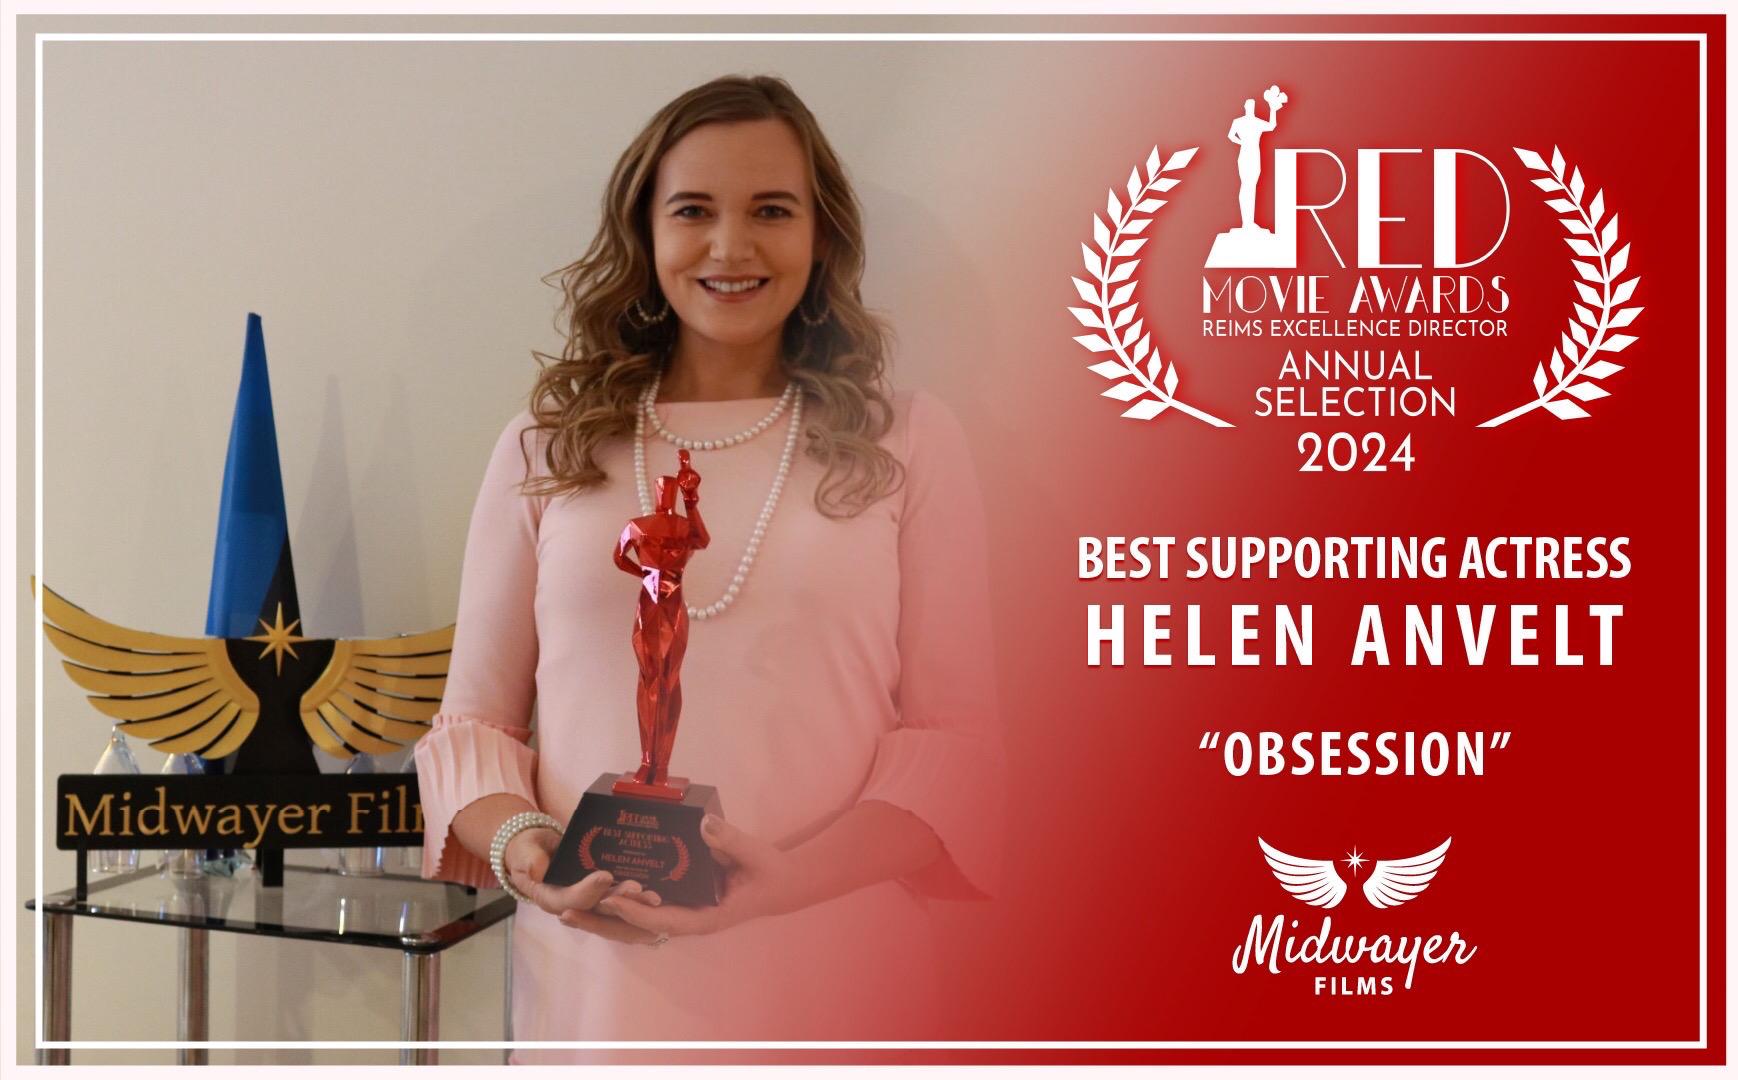 Helen Anvelt has been nominated for the Best Supporting Actress award at the RED Movie Awards for the film 'Obsession'